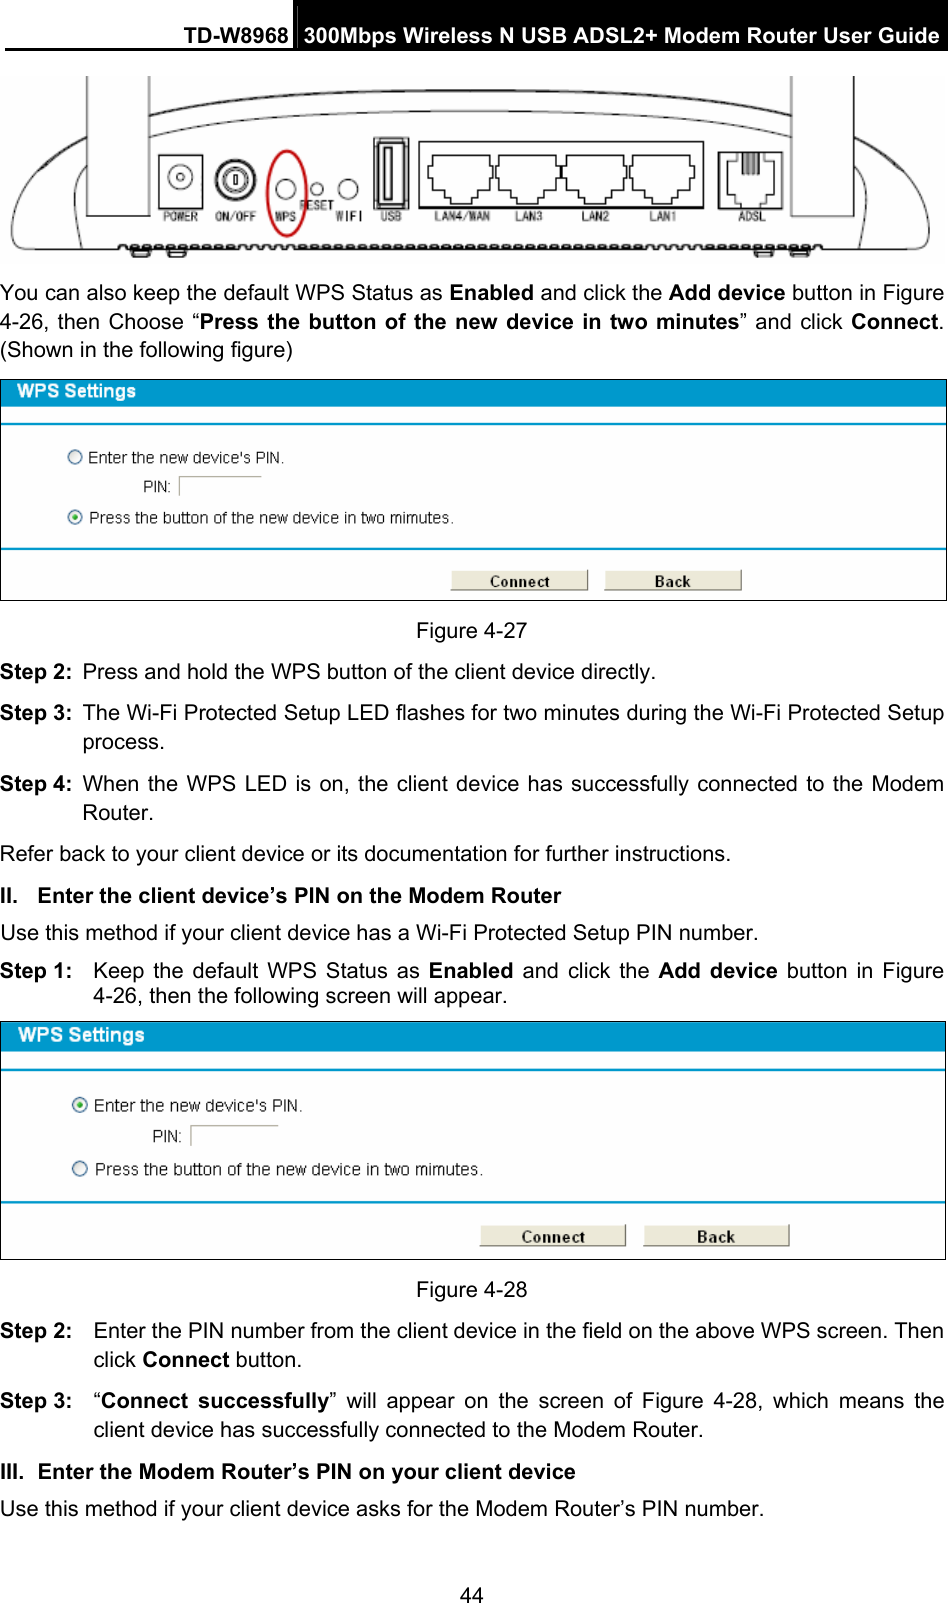 TD-W8968  300Mbps Wireless N USB ADSL2+ Modem Router User Guide 44  You can also keep the default WPS Status as Enabled and click the Add device button in Figure 4-26, then Choose “Press the button of the new device in two minutes” and click Connect. (Shown in the following figure)  Figure 4-27 Step 2:  Press and hold the WPS button of the client device directly.   Step 3:  The Wi-Fi Protected Setup LED flashes for two minutes during the Wi-Fi Protected Setup process.  Step 4:  When the WPS LED is on, the client device has successfully connected to the Modem Router.  Refer back to your client device or its documentation for further instructions. II.  Enter the client device’s PIN on the Modem Router Use this method if your client device has a Wi-Fi Protected Setup PIN number. Step 1:  Keep the default WPS Status as Enabled and click the Add device button in Figure 4-26, then the following screen will appear.    Figure 4-28 Step 2:  Enter the PIN number from the client device in the field on the above WPS screen. Then click Connect button. Step 3:  “Connect successfully” will appear on the screen of Figure 4-28, which means the client device has successfully connected to the Modem Router. III.  Enter the Modem Router’s PIN on your client device Use this method if your client device asks for the Modem Router’s PIN number.   